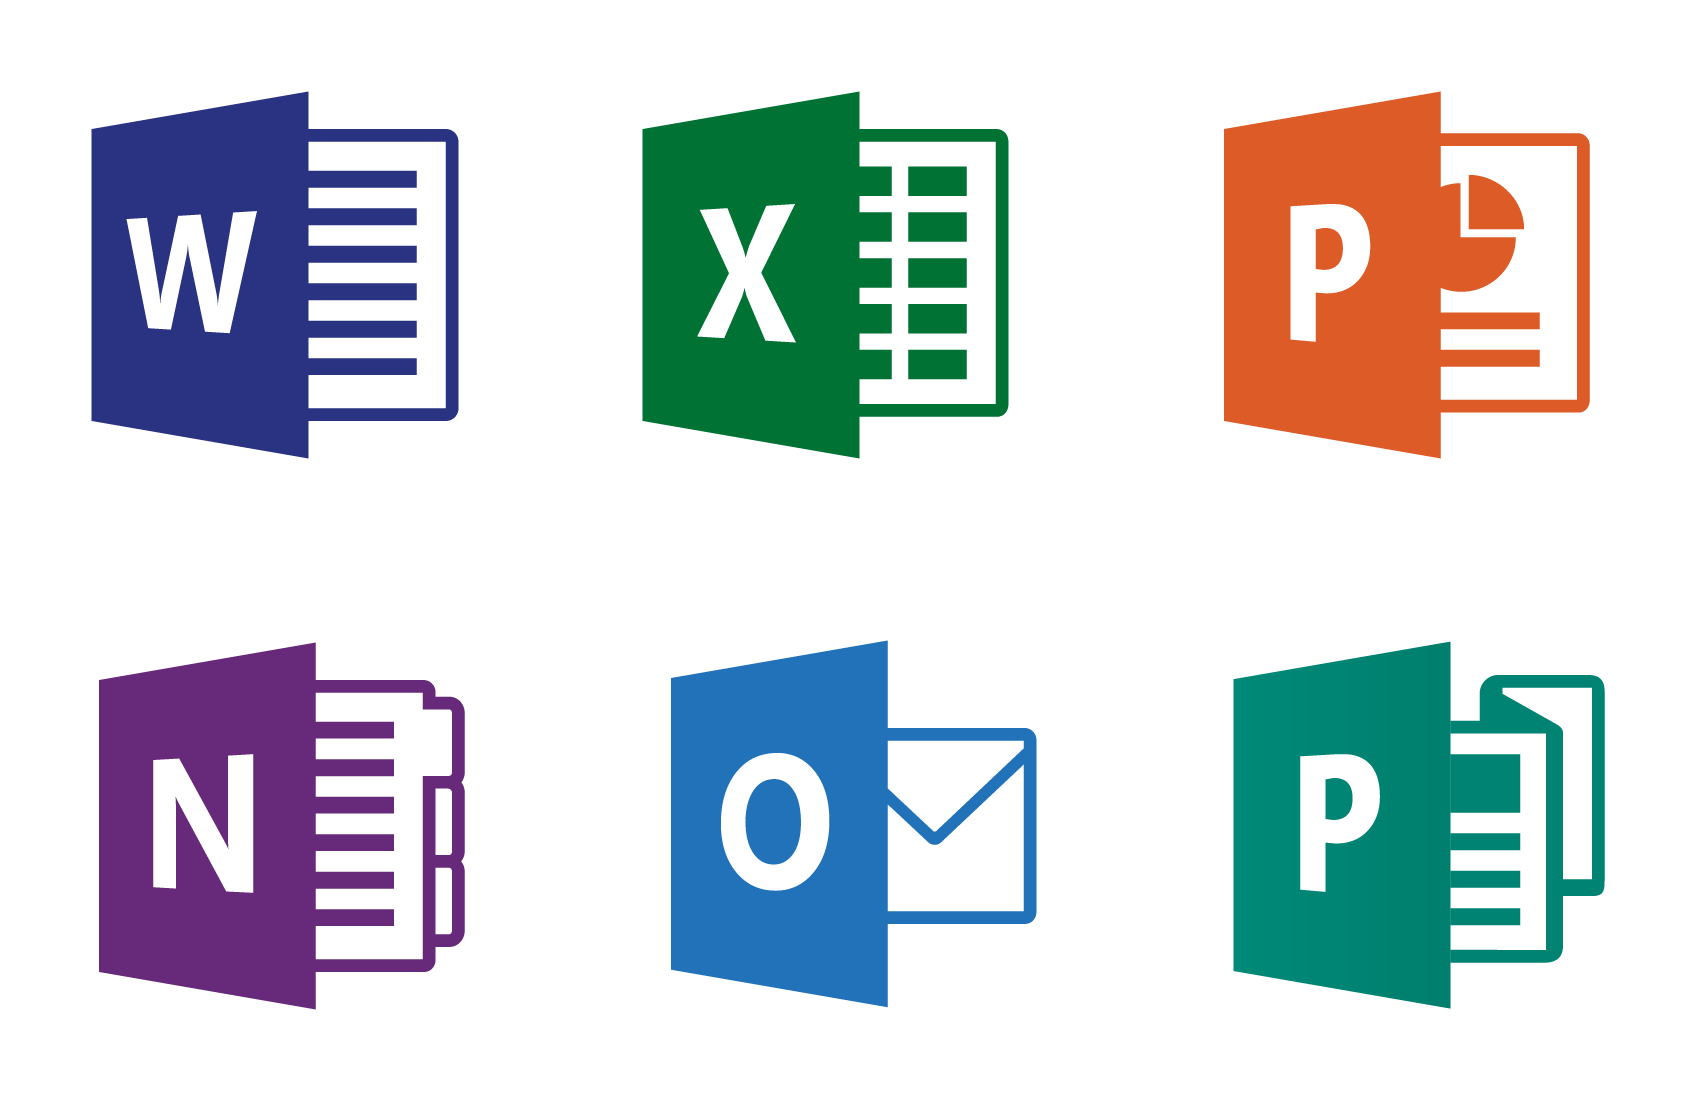 free tutorial for microsoft office 2016